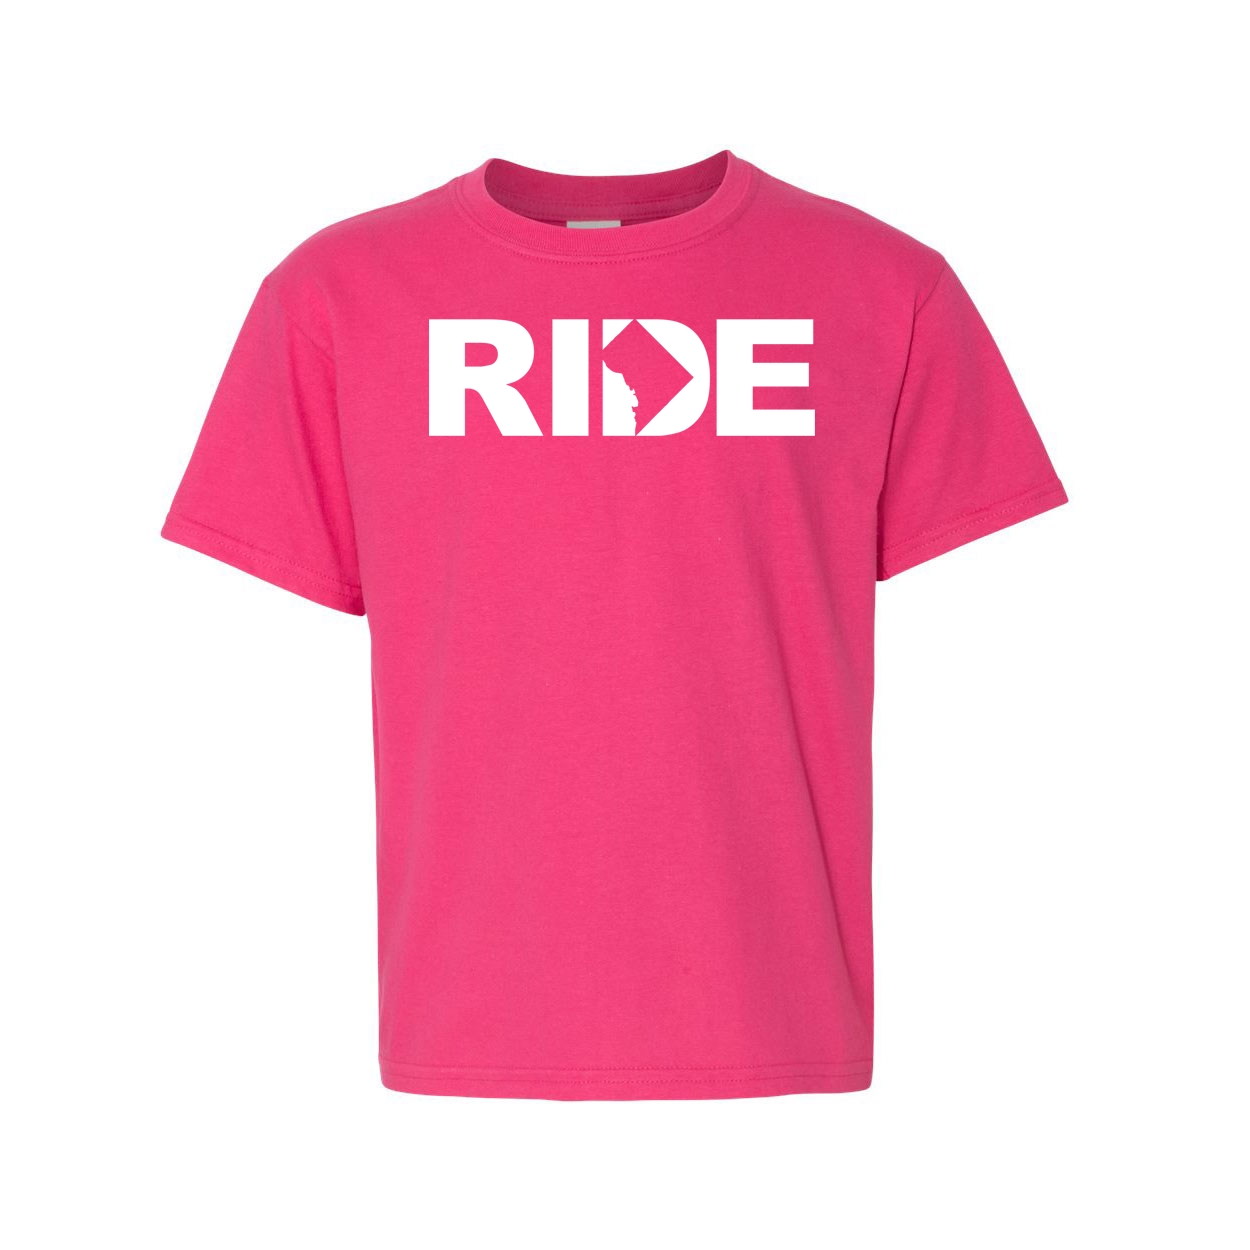 Ride District of Columbia Classic Youth T-Shirt Pink (White Logo)